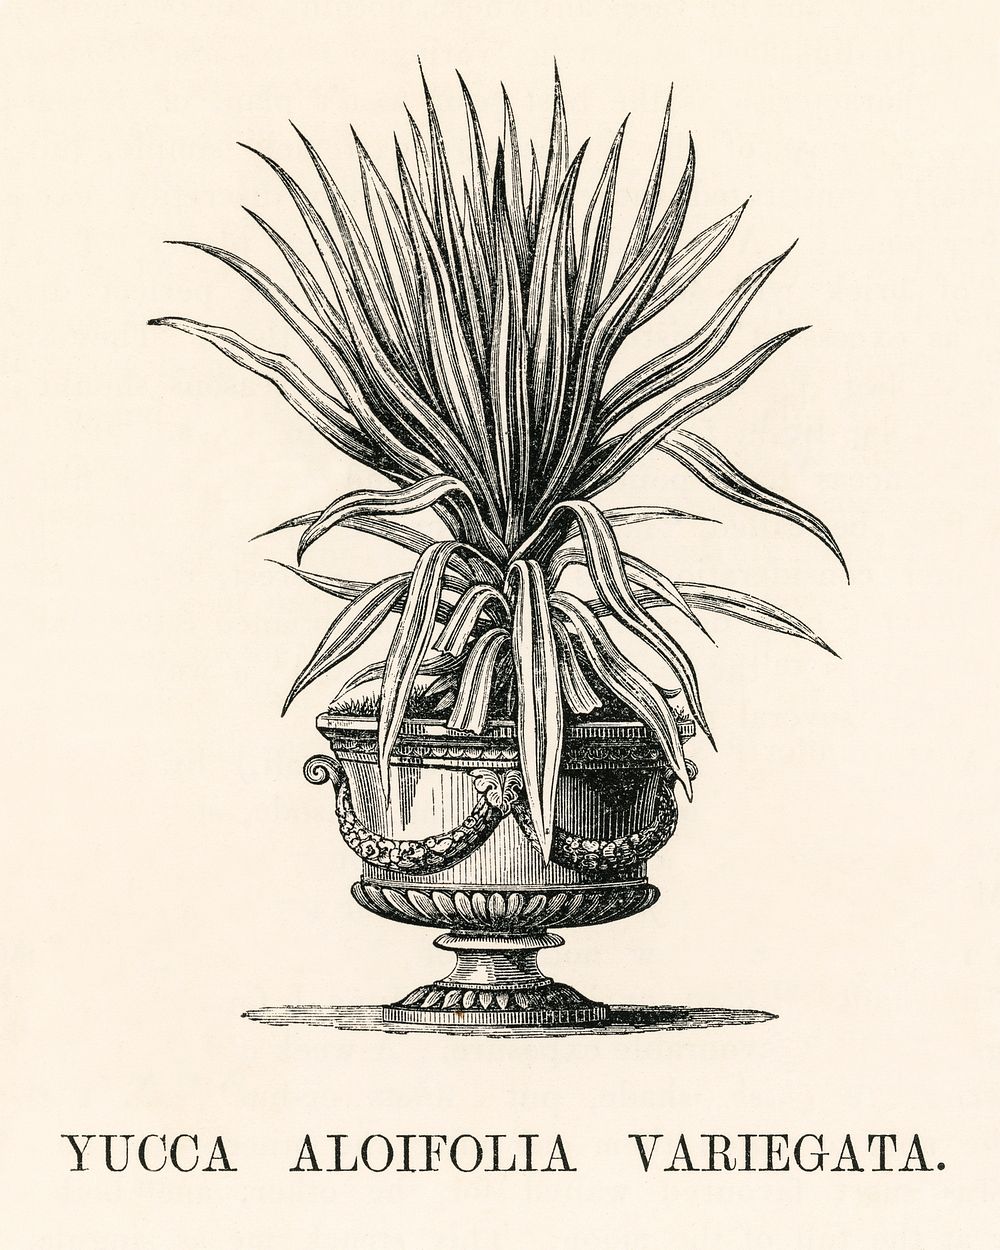 Yucca Aloifolia Variegata engraved by Benjamin Fawcett (1808-1893) for Shirley Hibberd&rsquo;s (1825-1890) New and Rare…